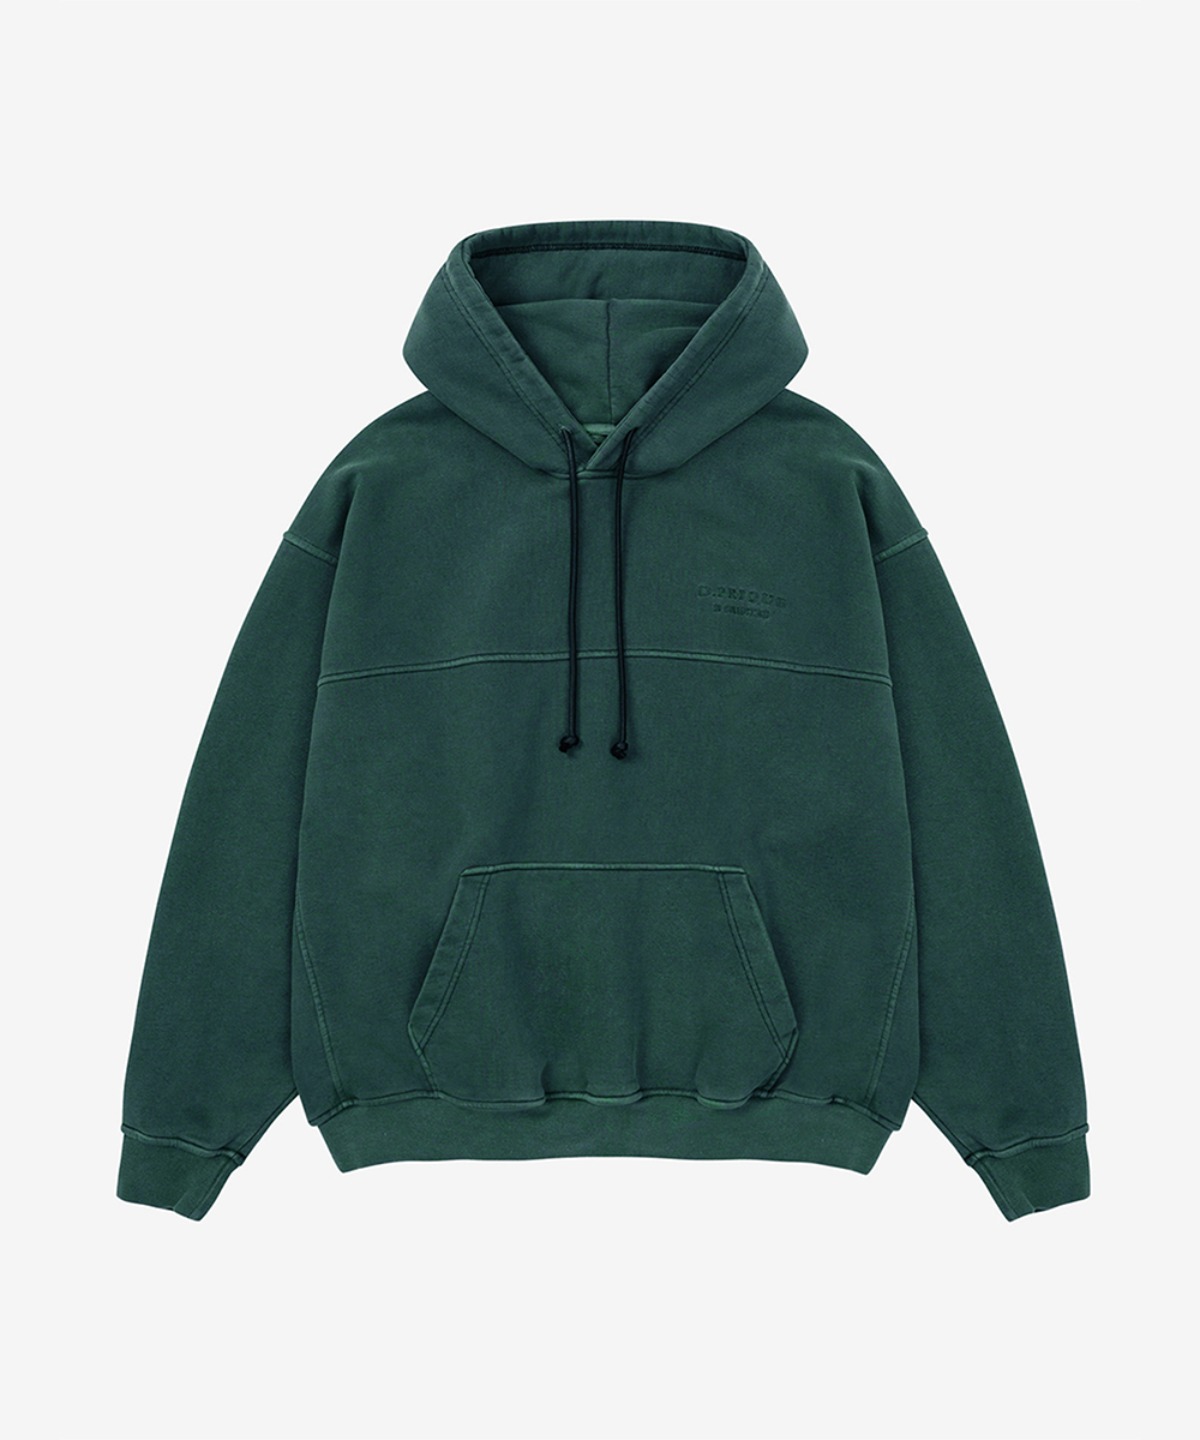 DPRIQUE디프리크 Washed Hoodie - Forest Green